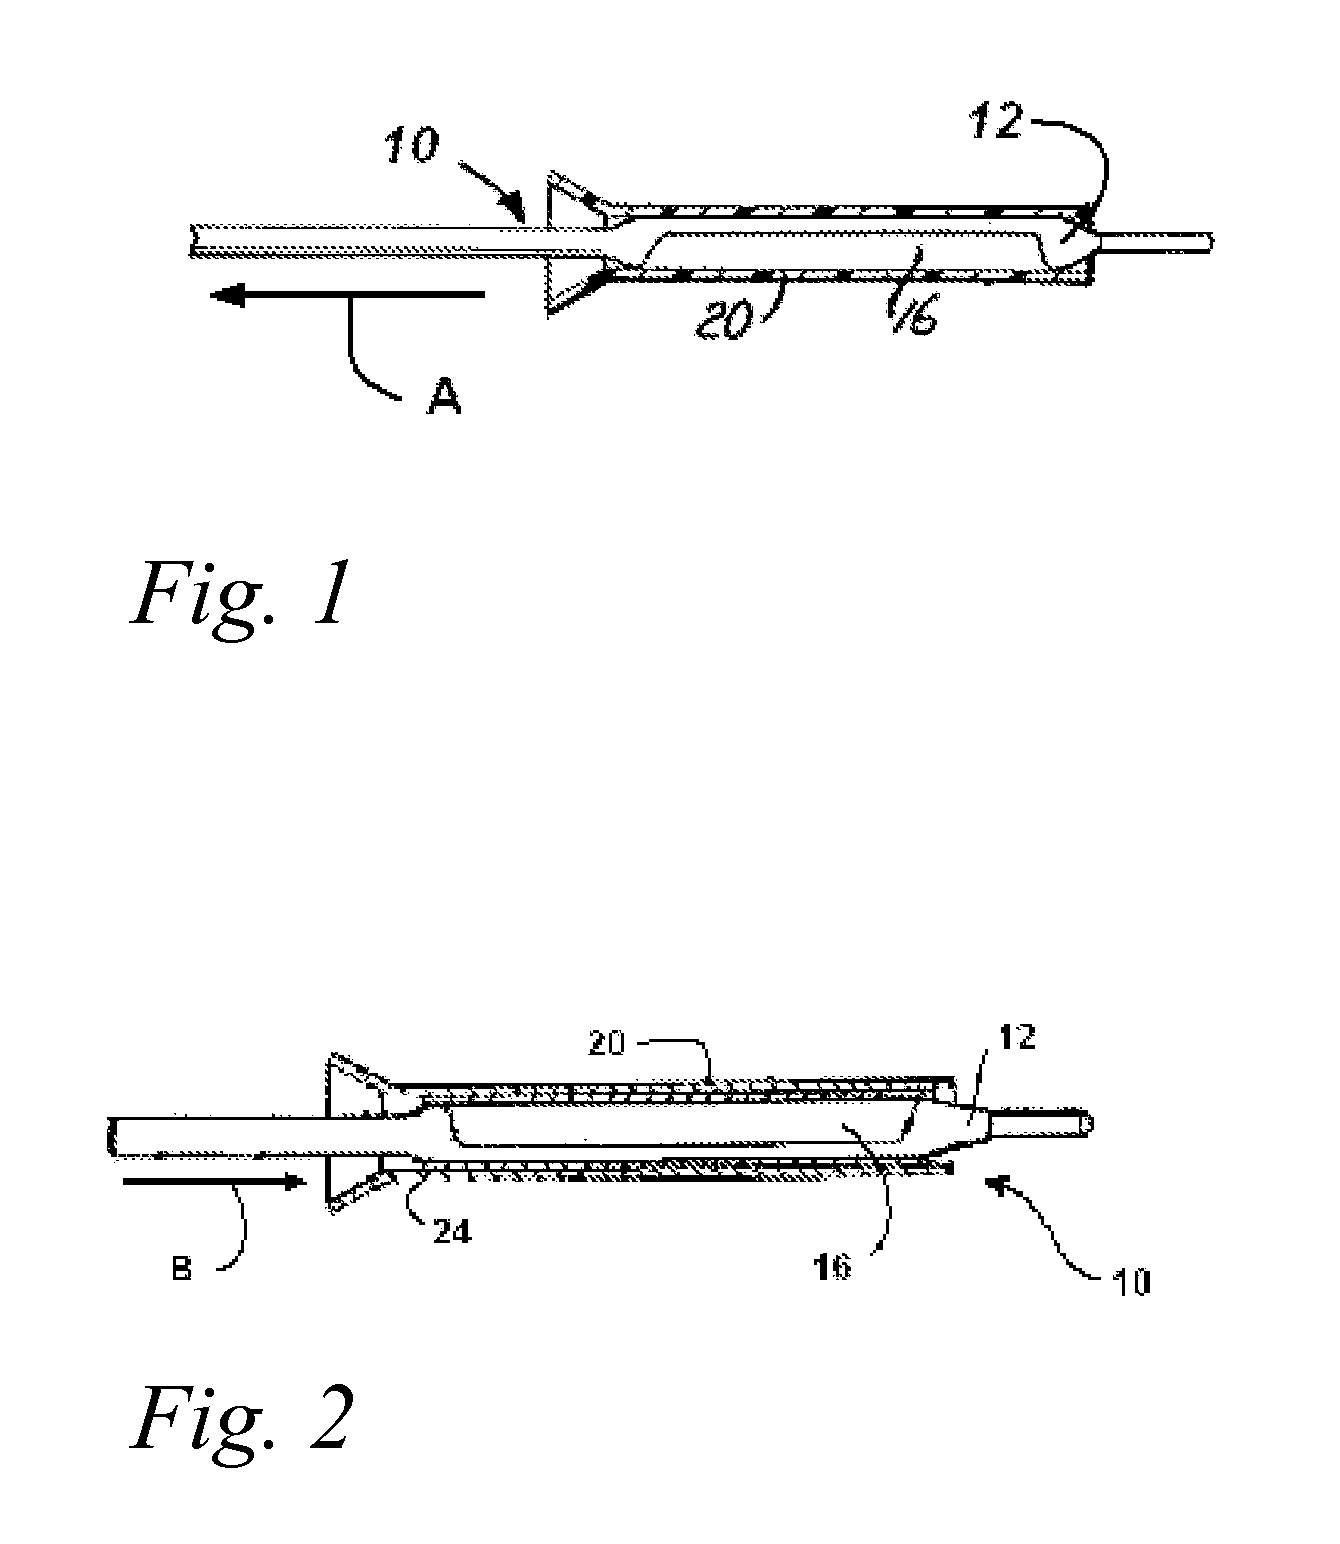 Coating Process for Drug Delivery Balloons Using Heat-Induced Rewrap Memory